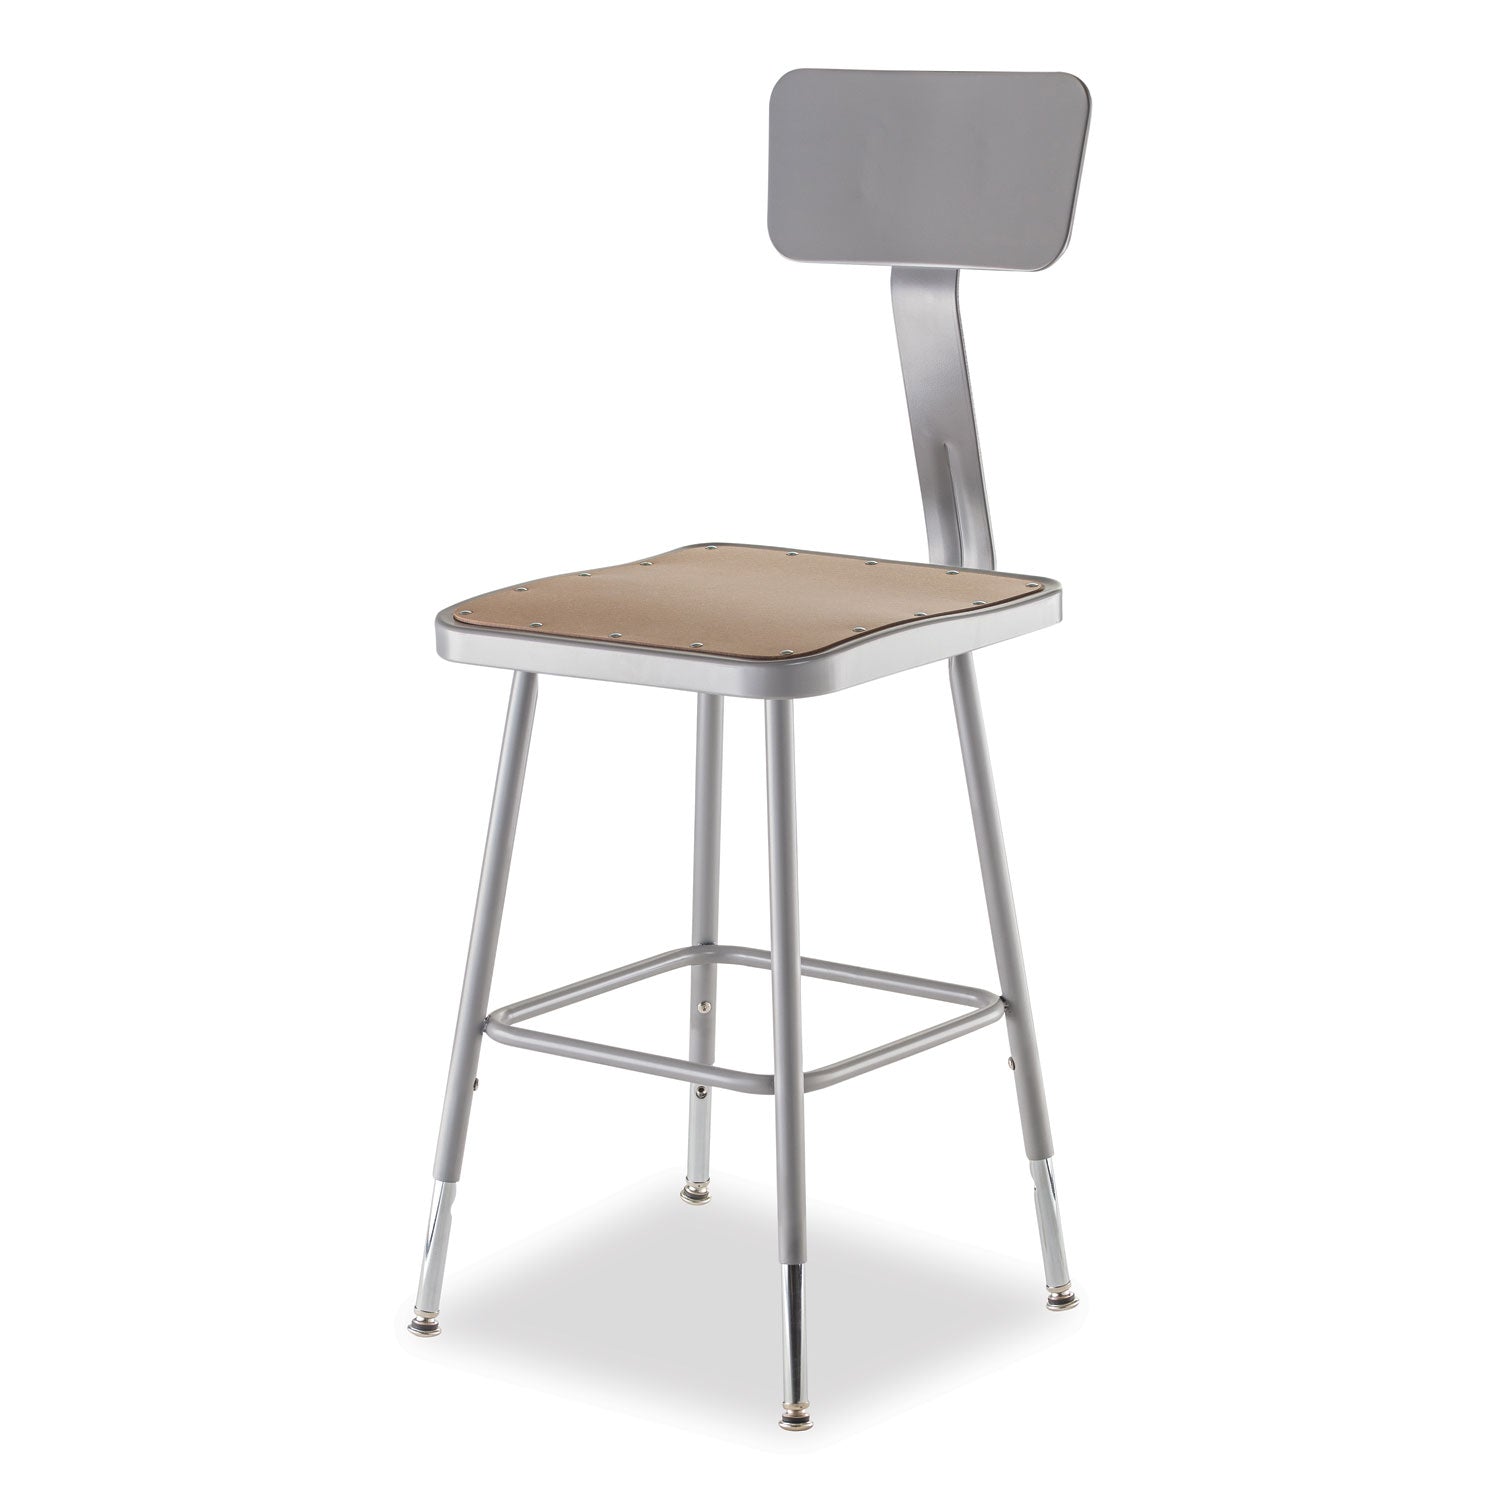 6300-series-height-adj-hd-square-seat-steel-stool-w-back-supports-500-lb-18-26-seat-ht-brown-gray-ships-in-1-3-bus-days_nps6318hb - 2